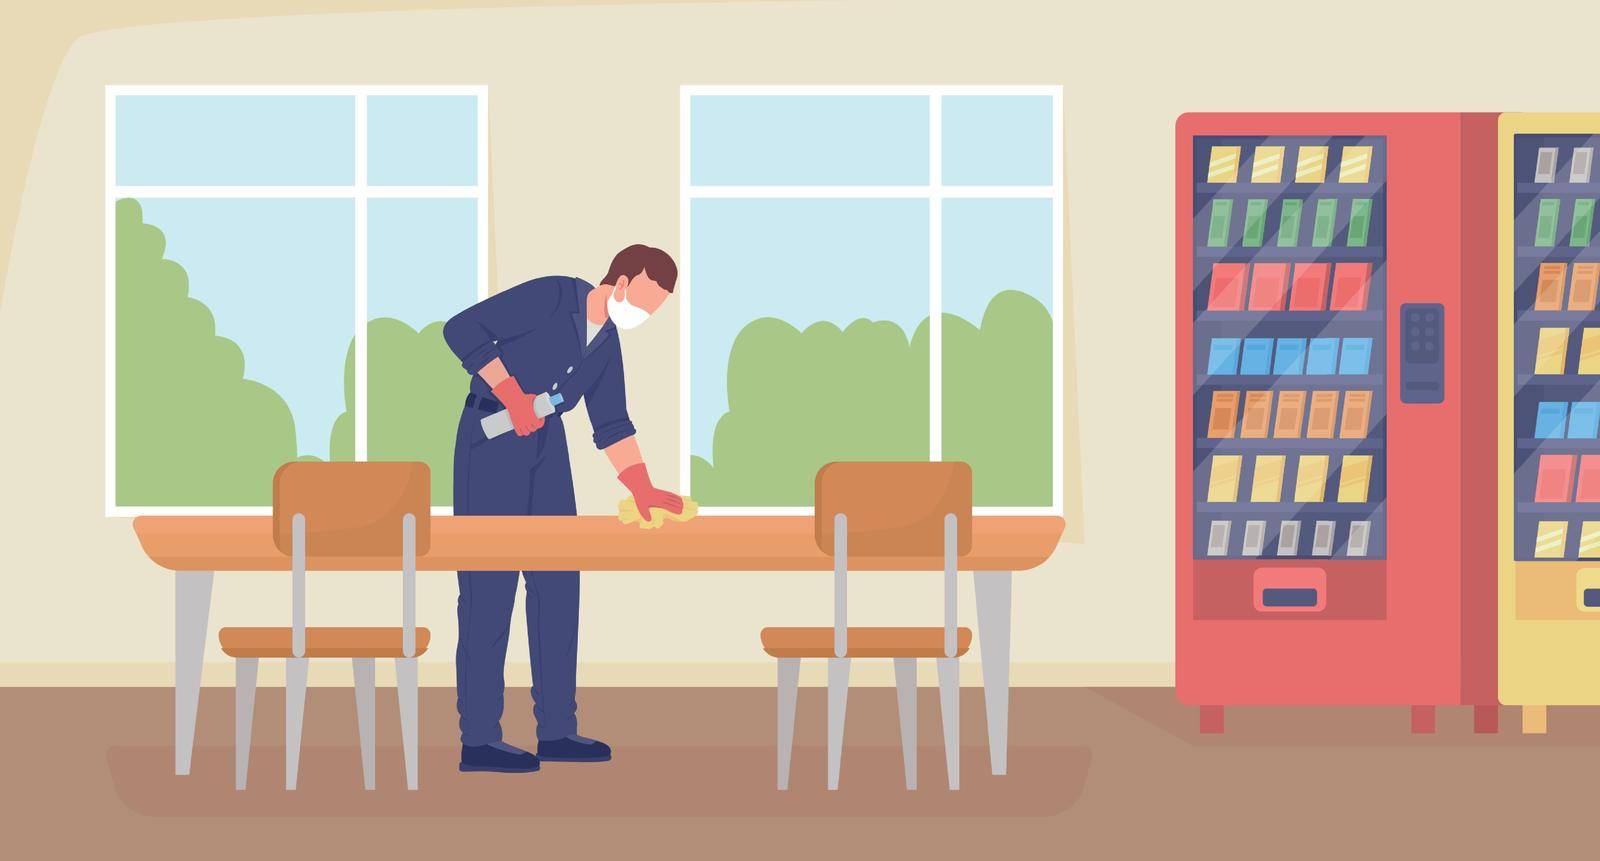 Cleaning cafeteria flat color vector illustration. Disinfecting desk and tables for lunch. Cleanup work. Cleaner in uniform 2D cartoon character with school hallway interior on background